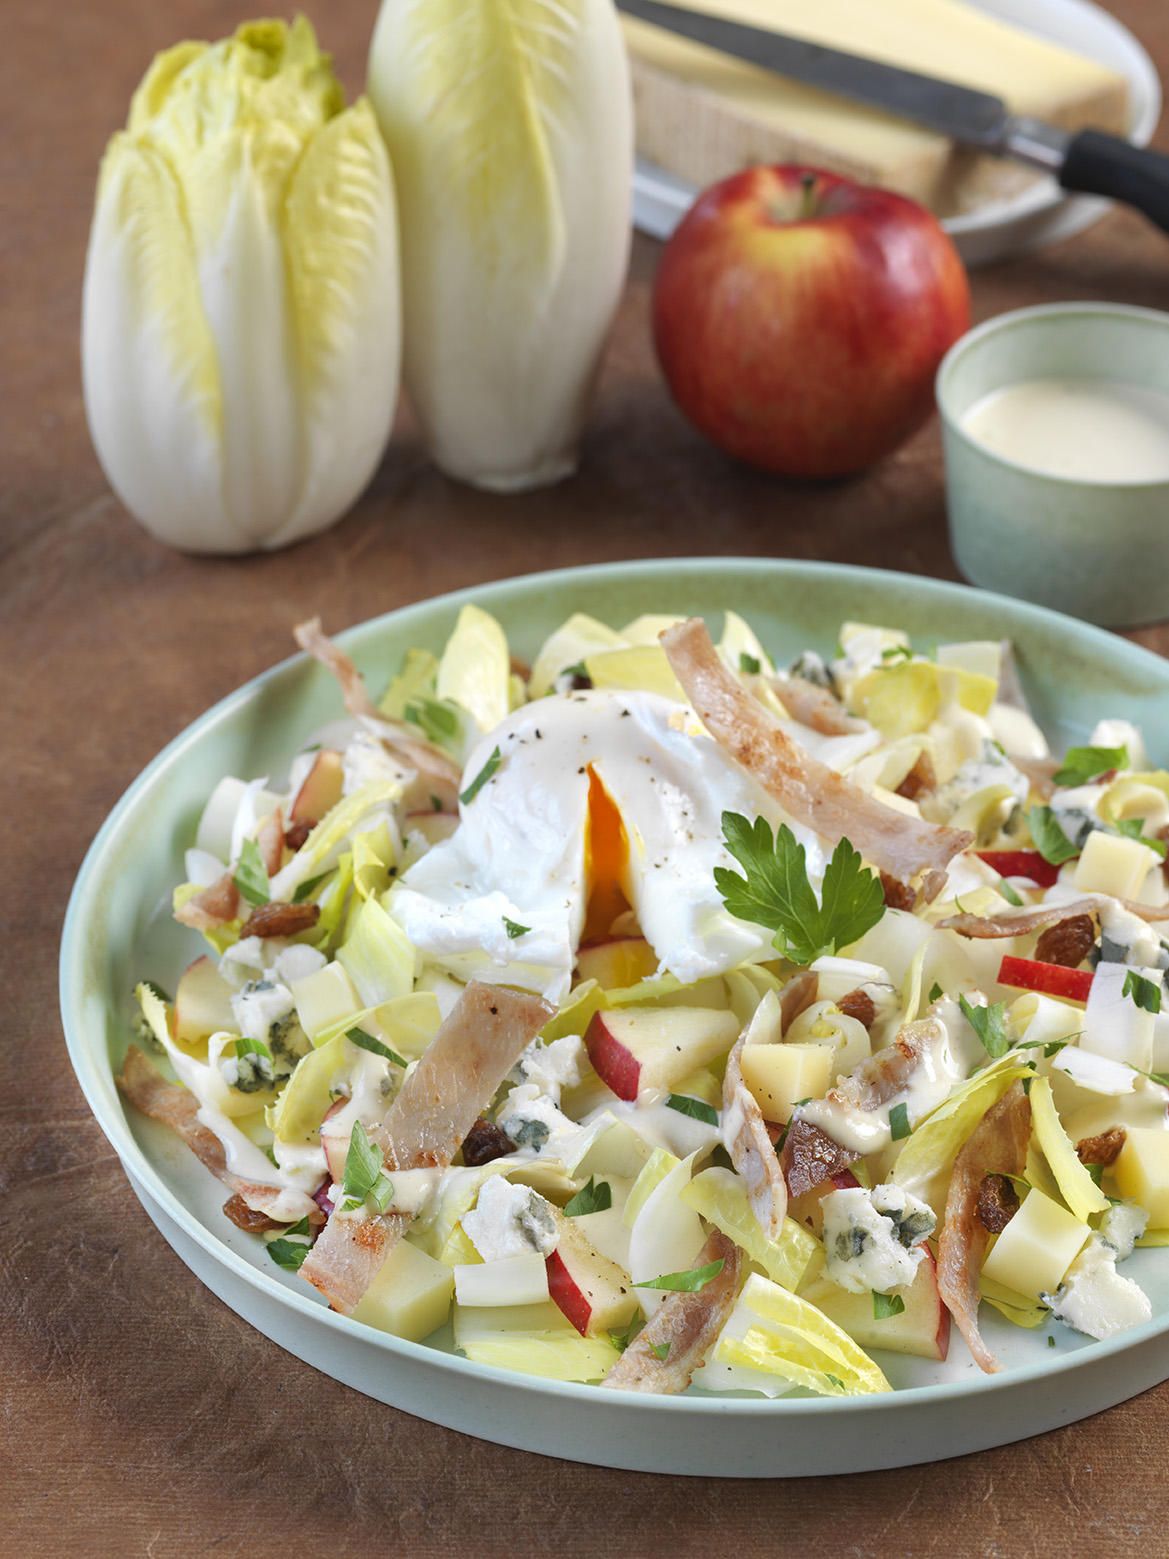 Salade hivernale (endive, bacon, œuf, fromage)